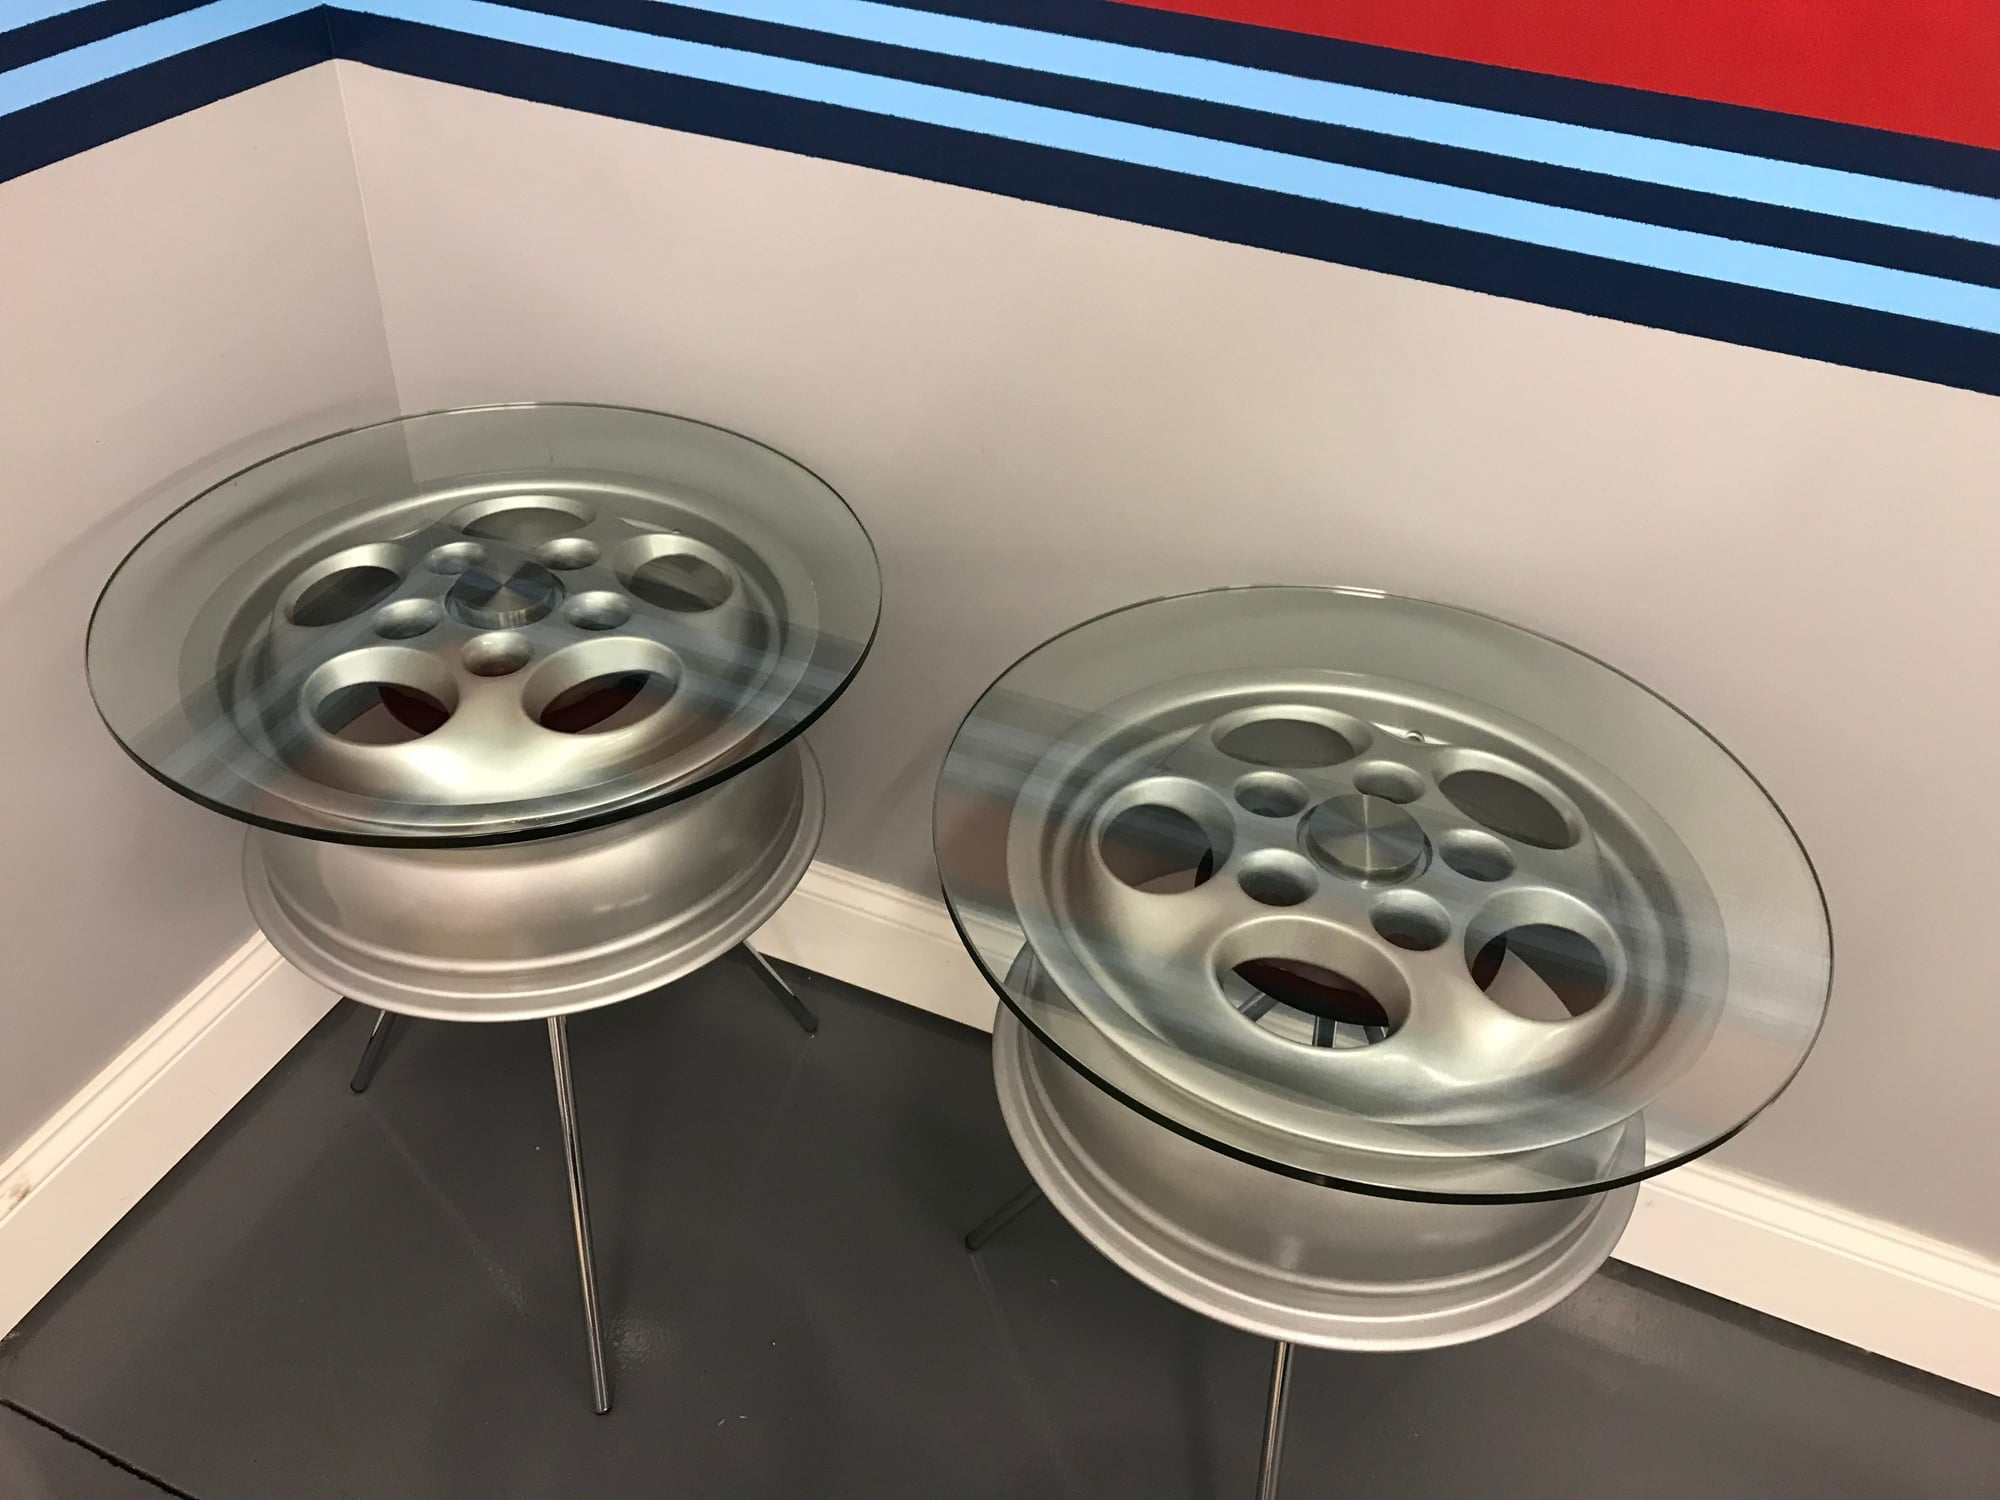 Miscellaneous - (2) Custom Porsche Phonedial Wheel Tables - New - All Years  All Models - Winston Salem, NC 27127, United States